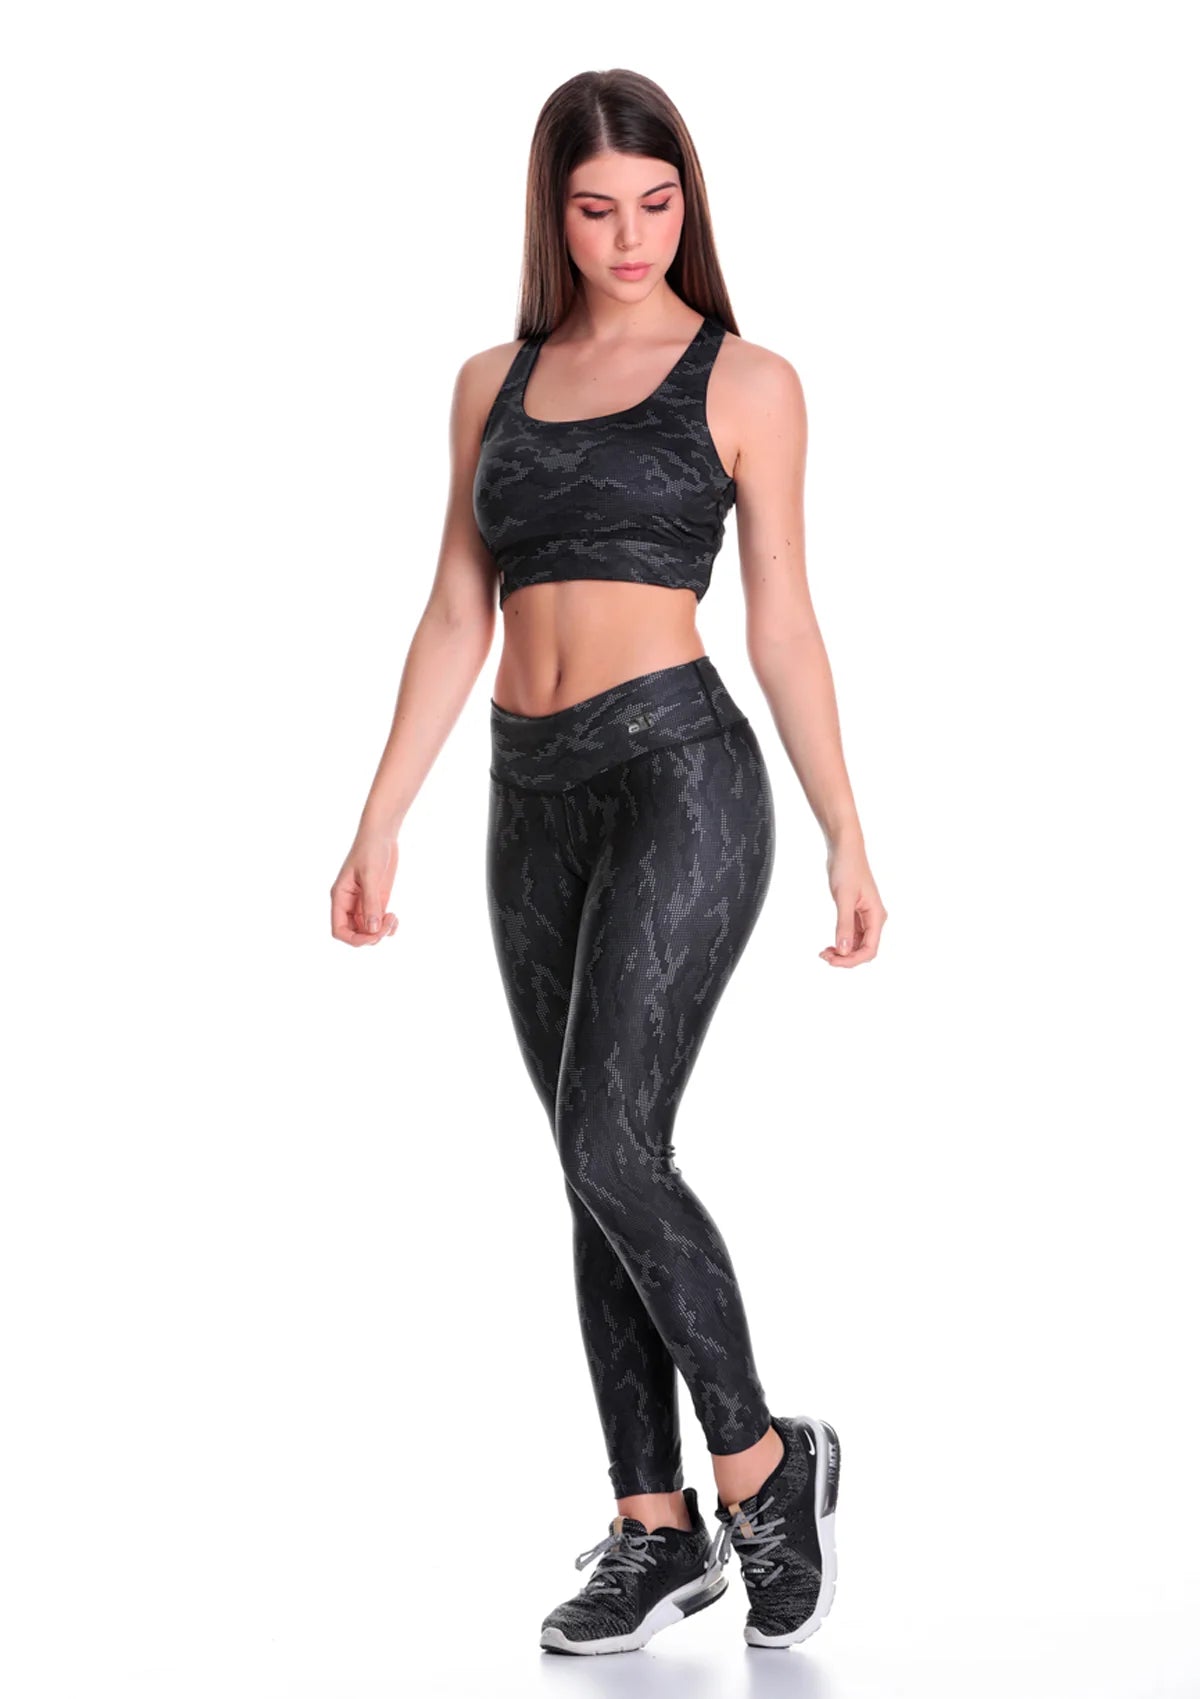 Best Deals for See Thru Yoga Pants